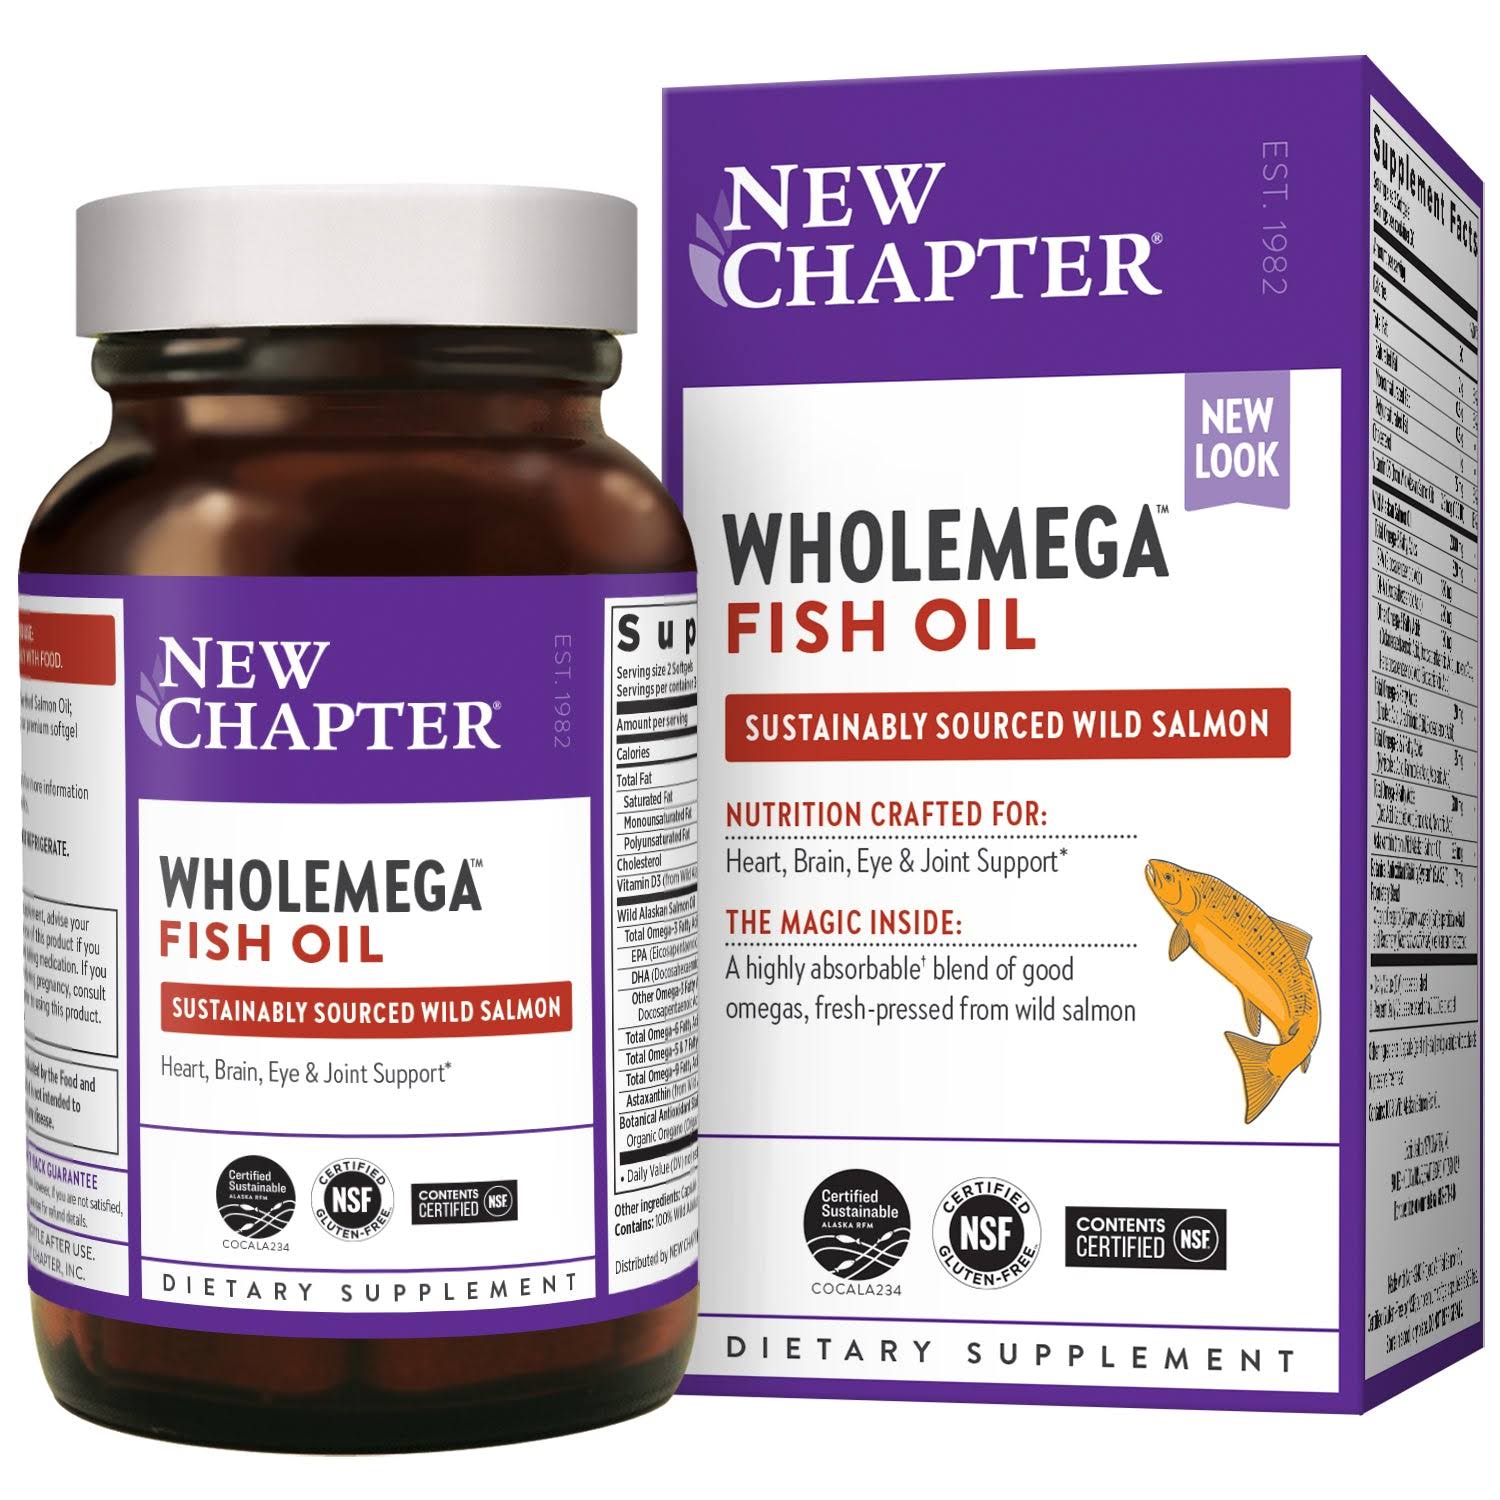 New Chapter Wholemega Fish Oil Supplement